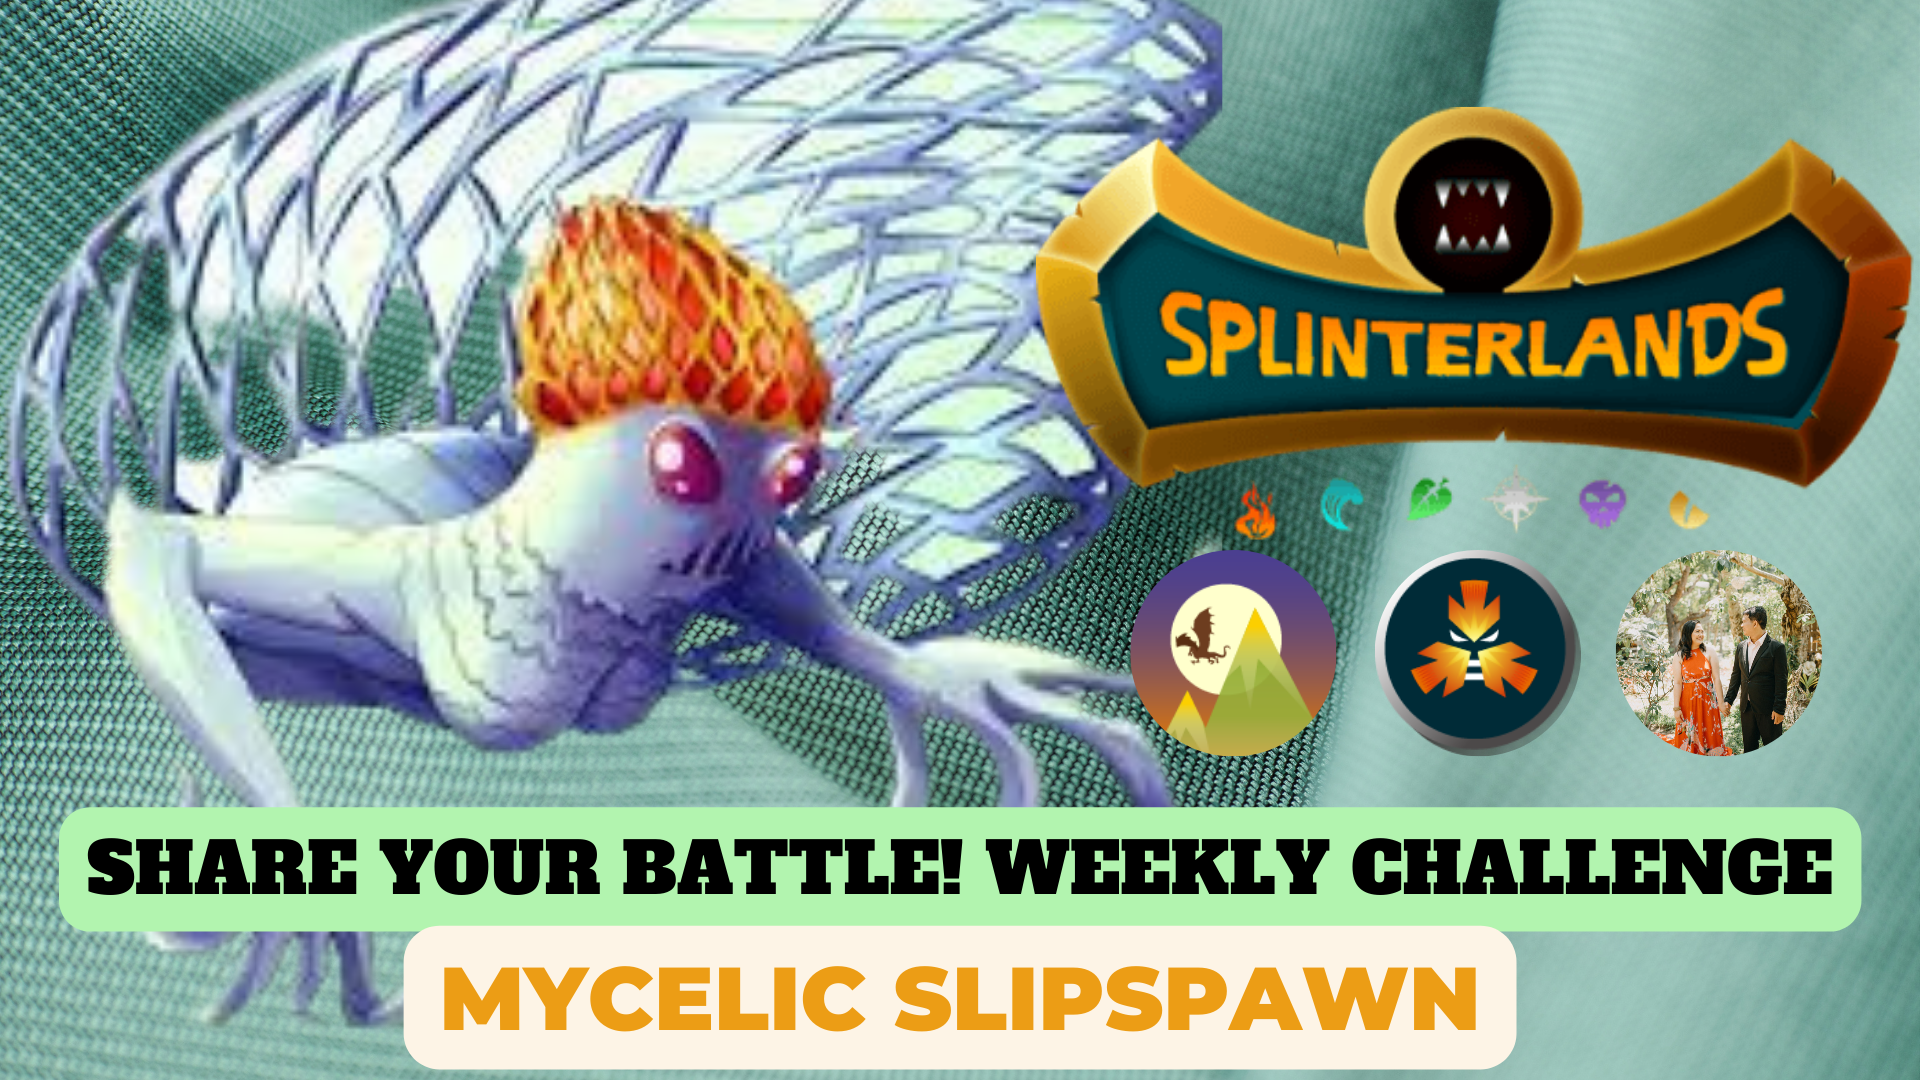 SHARE YOUR BATTLE weeKLY cHALLENGE.png